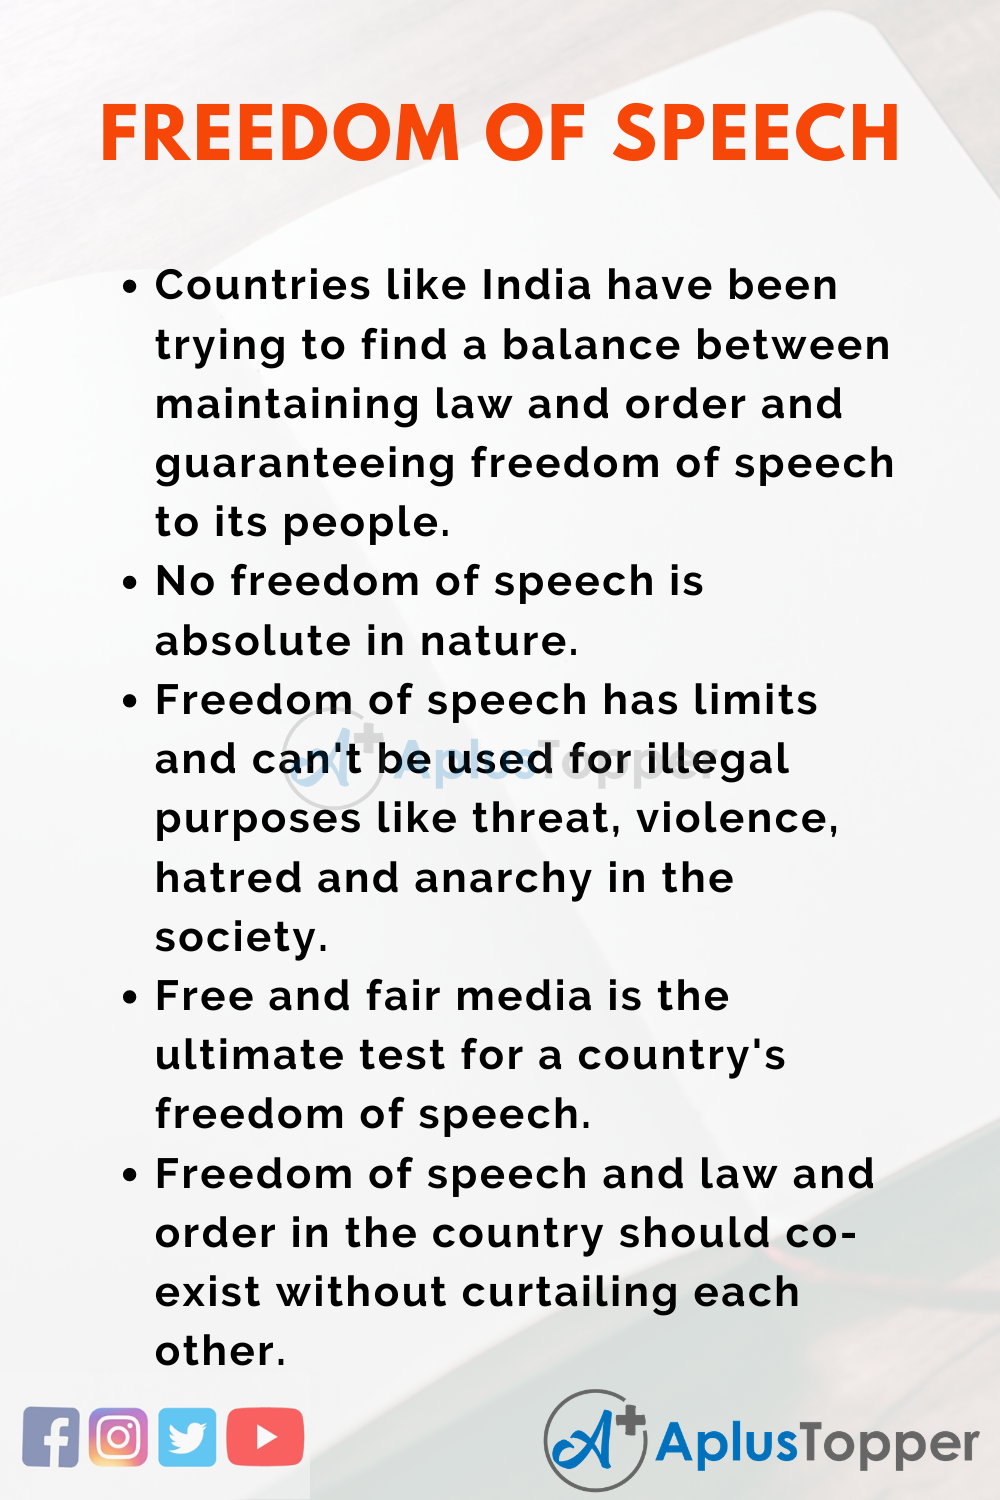 should there be limits to freedom of speech essay